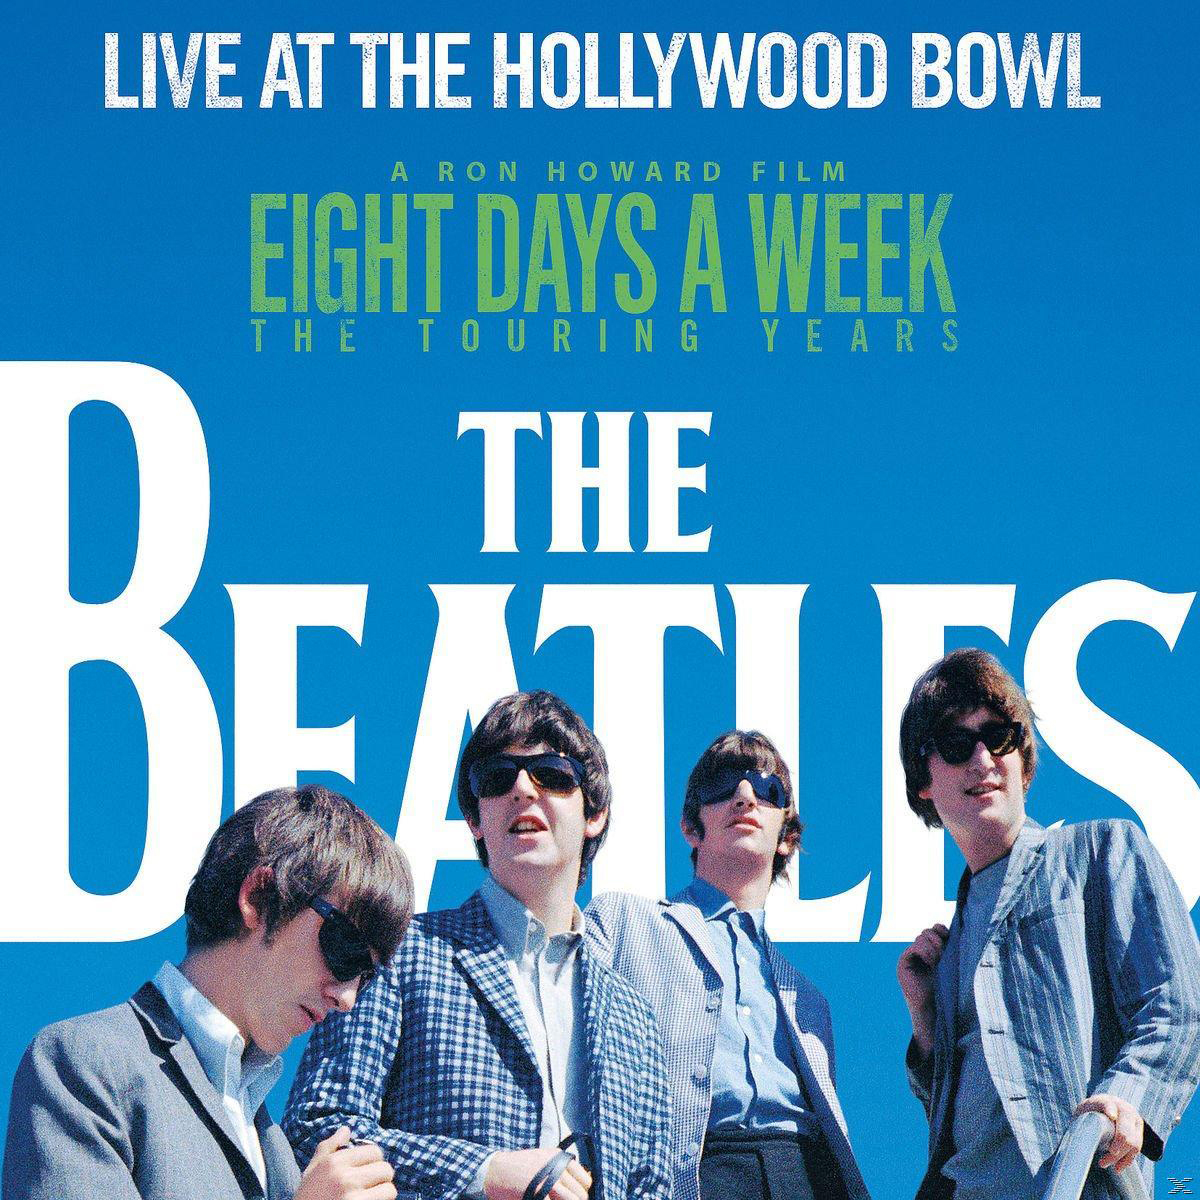 At - Hollywood The Live Bowl - The Beatles (Vinyl)